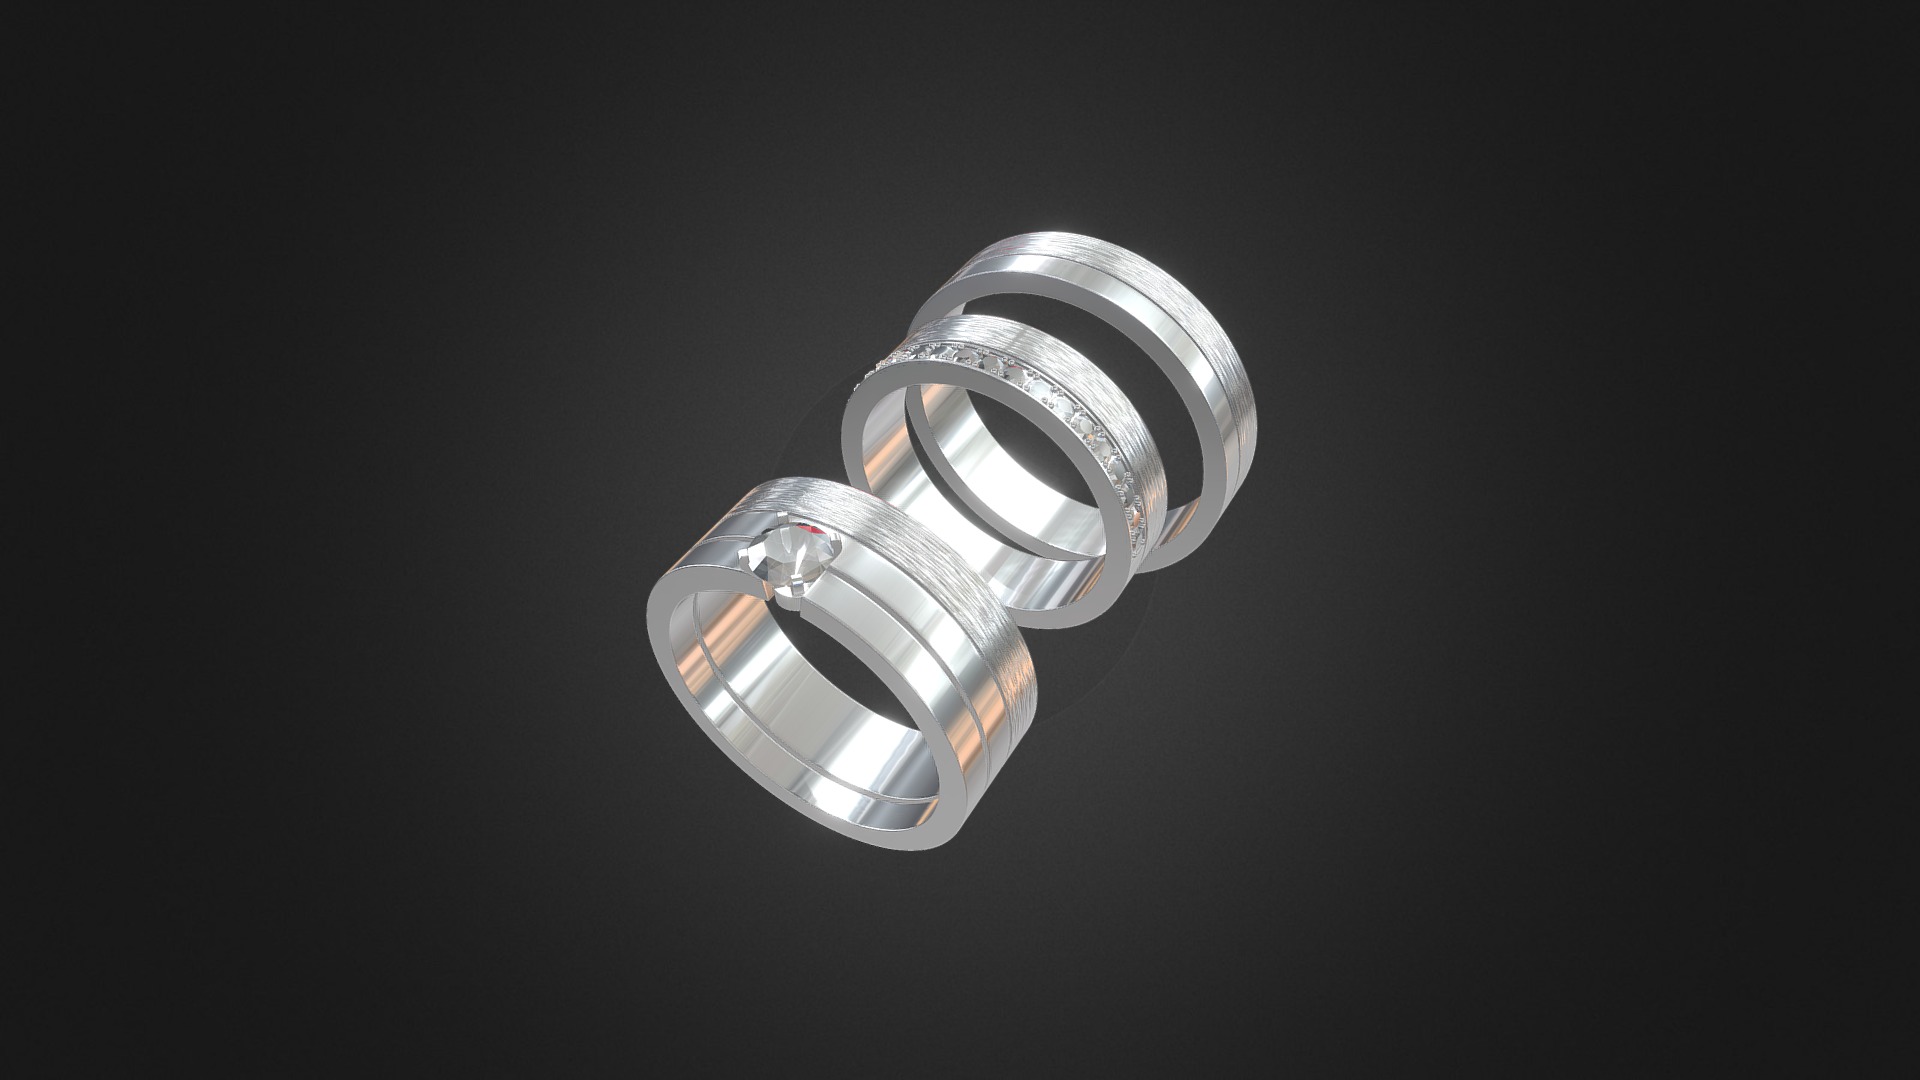 3D model 1037 – Rings - This is a 3D model of the 1037 - Rings. The 3D model is about a silver ring with a diamond in the middle.